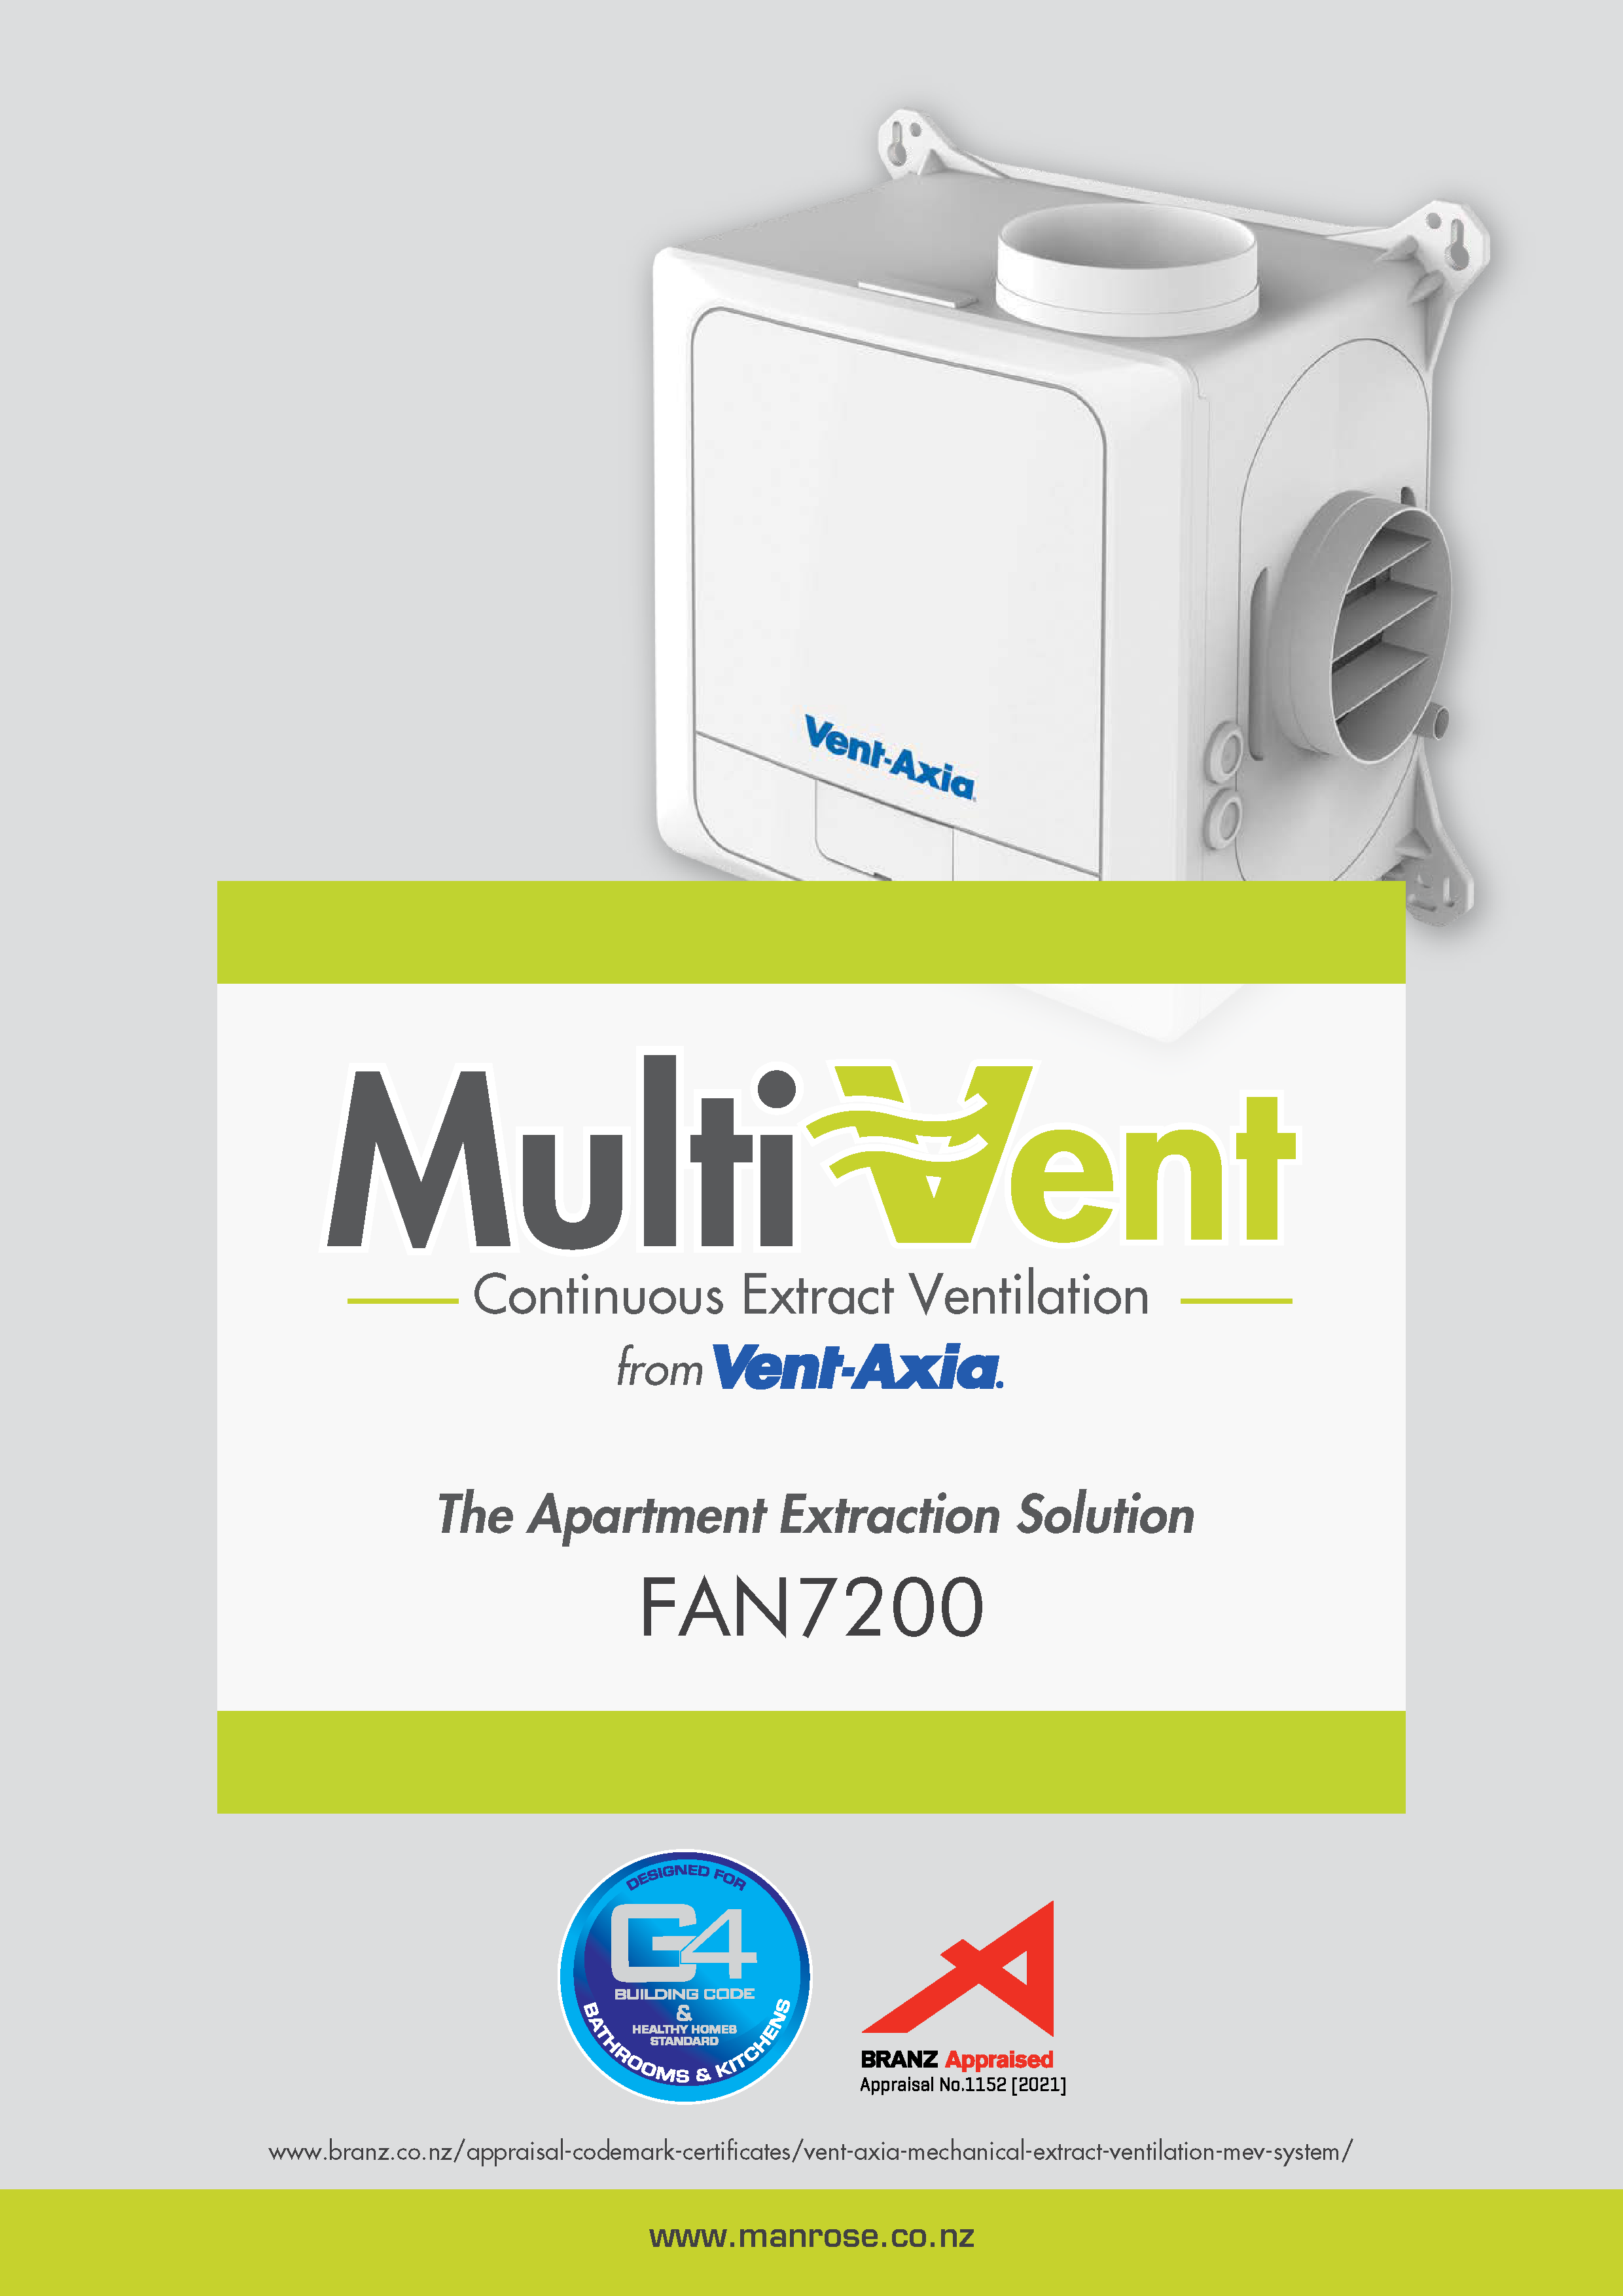 MultiVent Continuous Extract Ventilation System